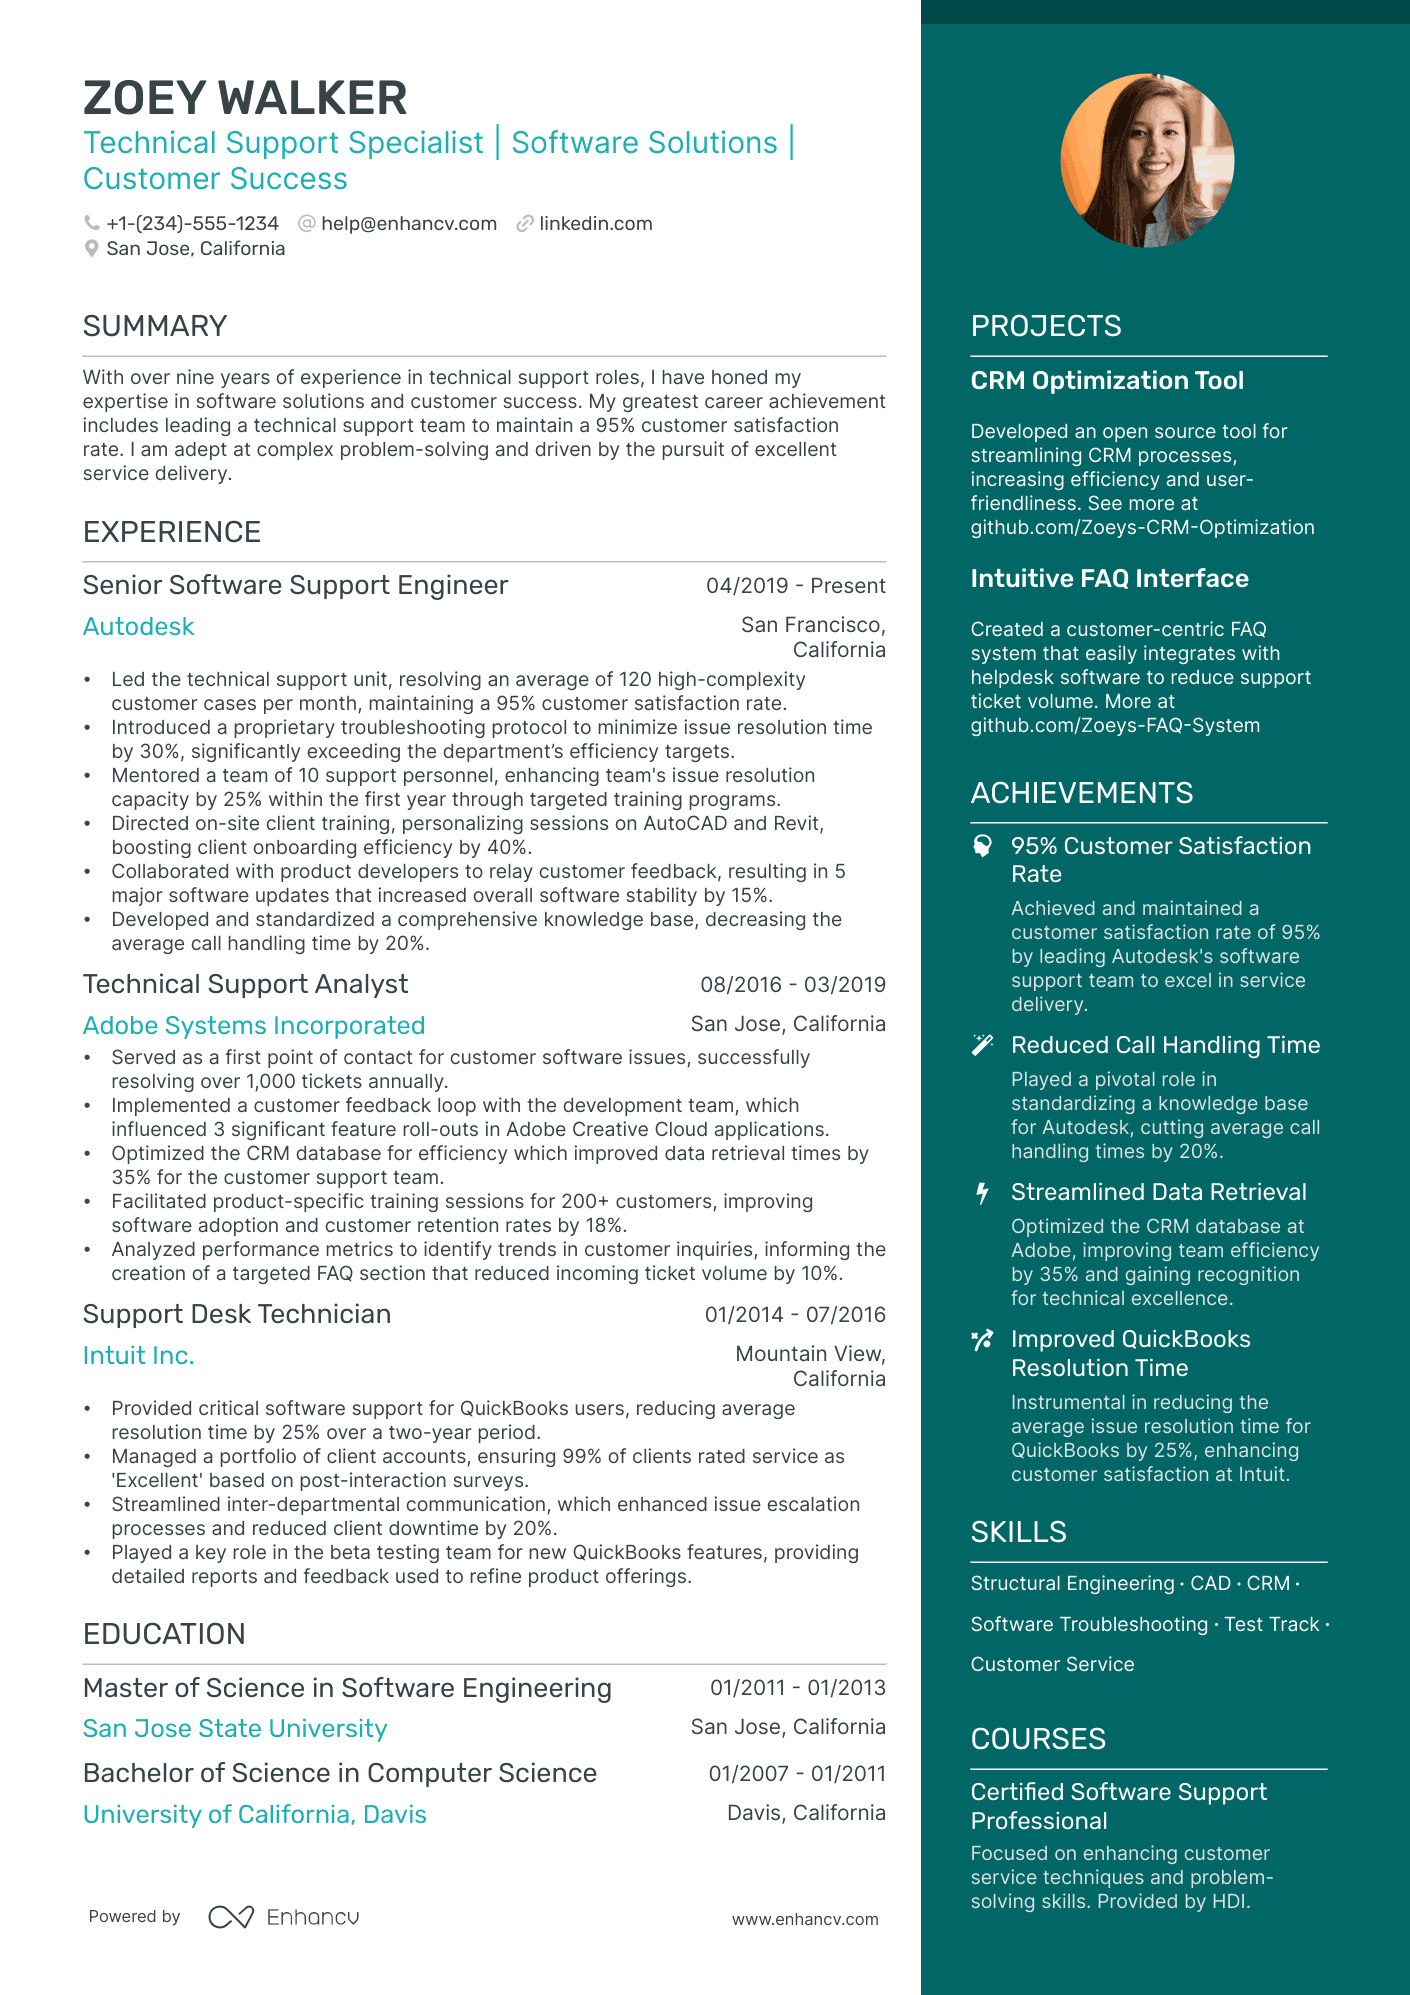 technical support manager resume